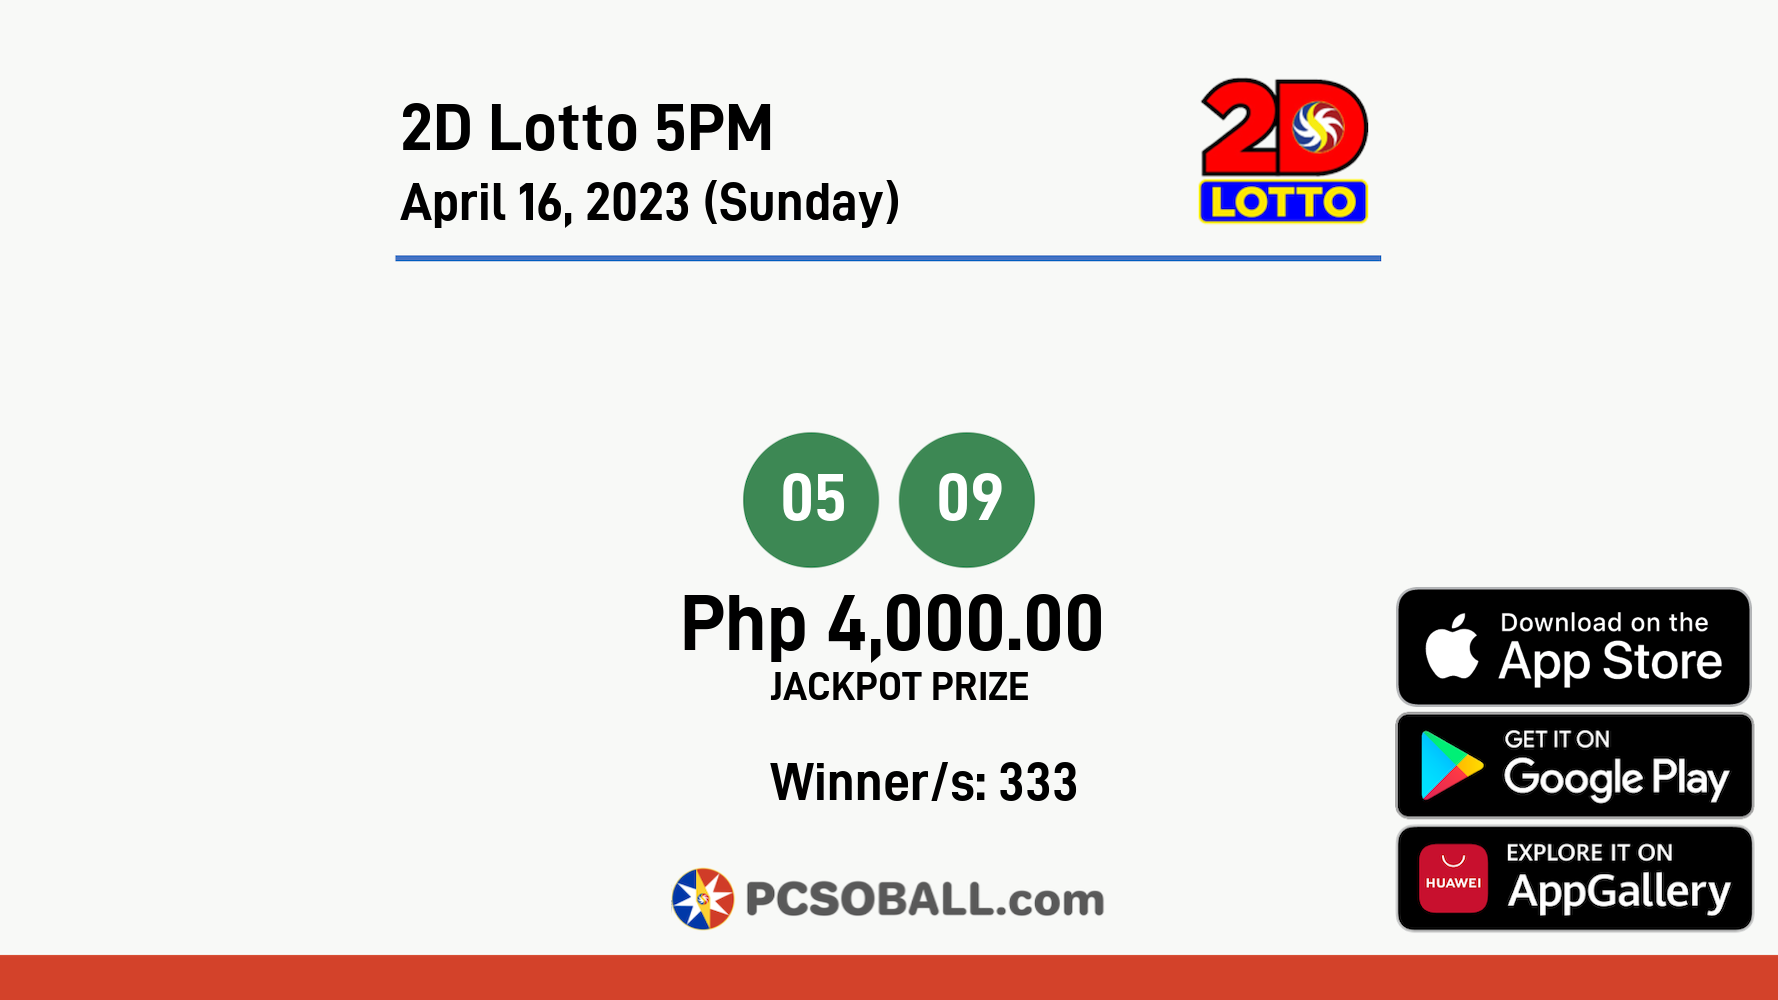 2D Lotto 5PM April 16, 2023 (Sunday) Result